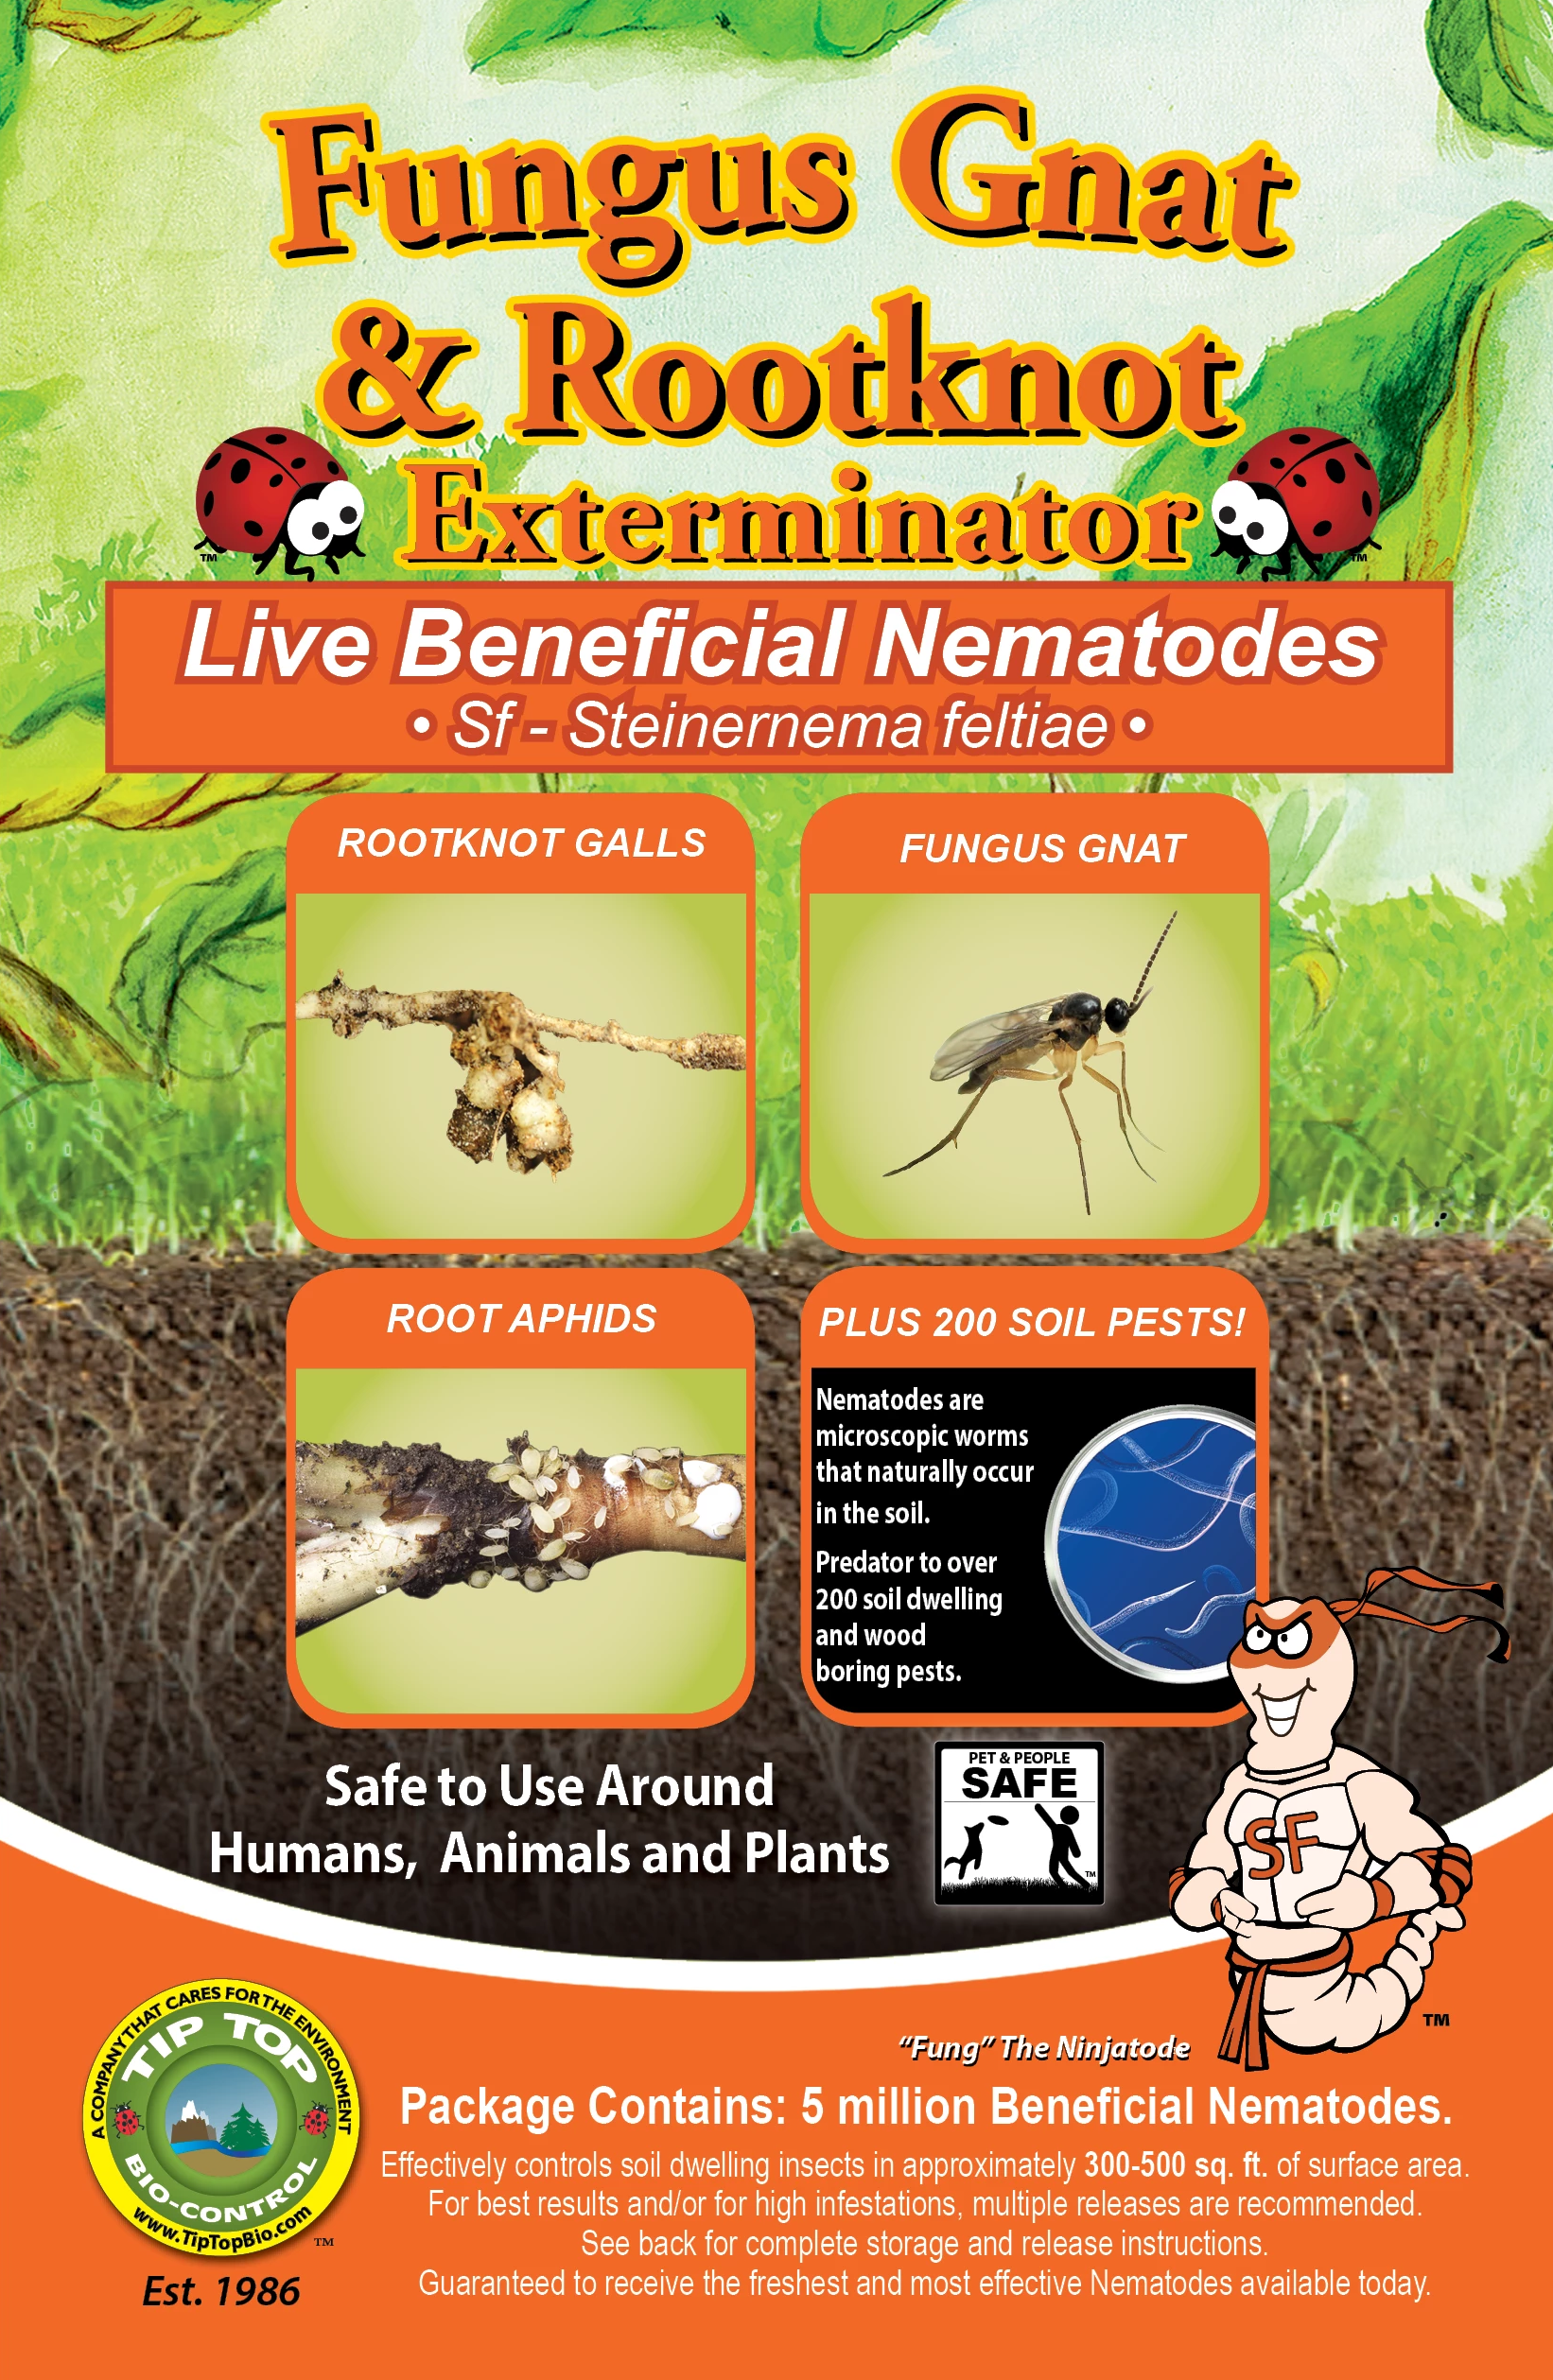 How to get rid of fungus gnats — Plant Care Tips and More · La